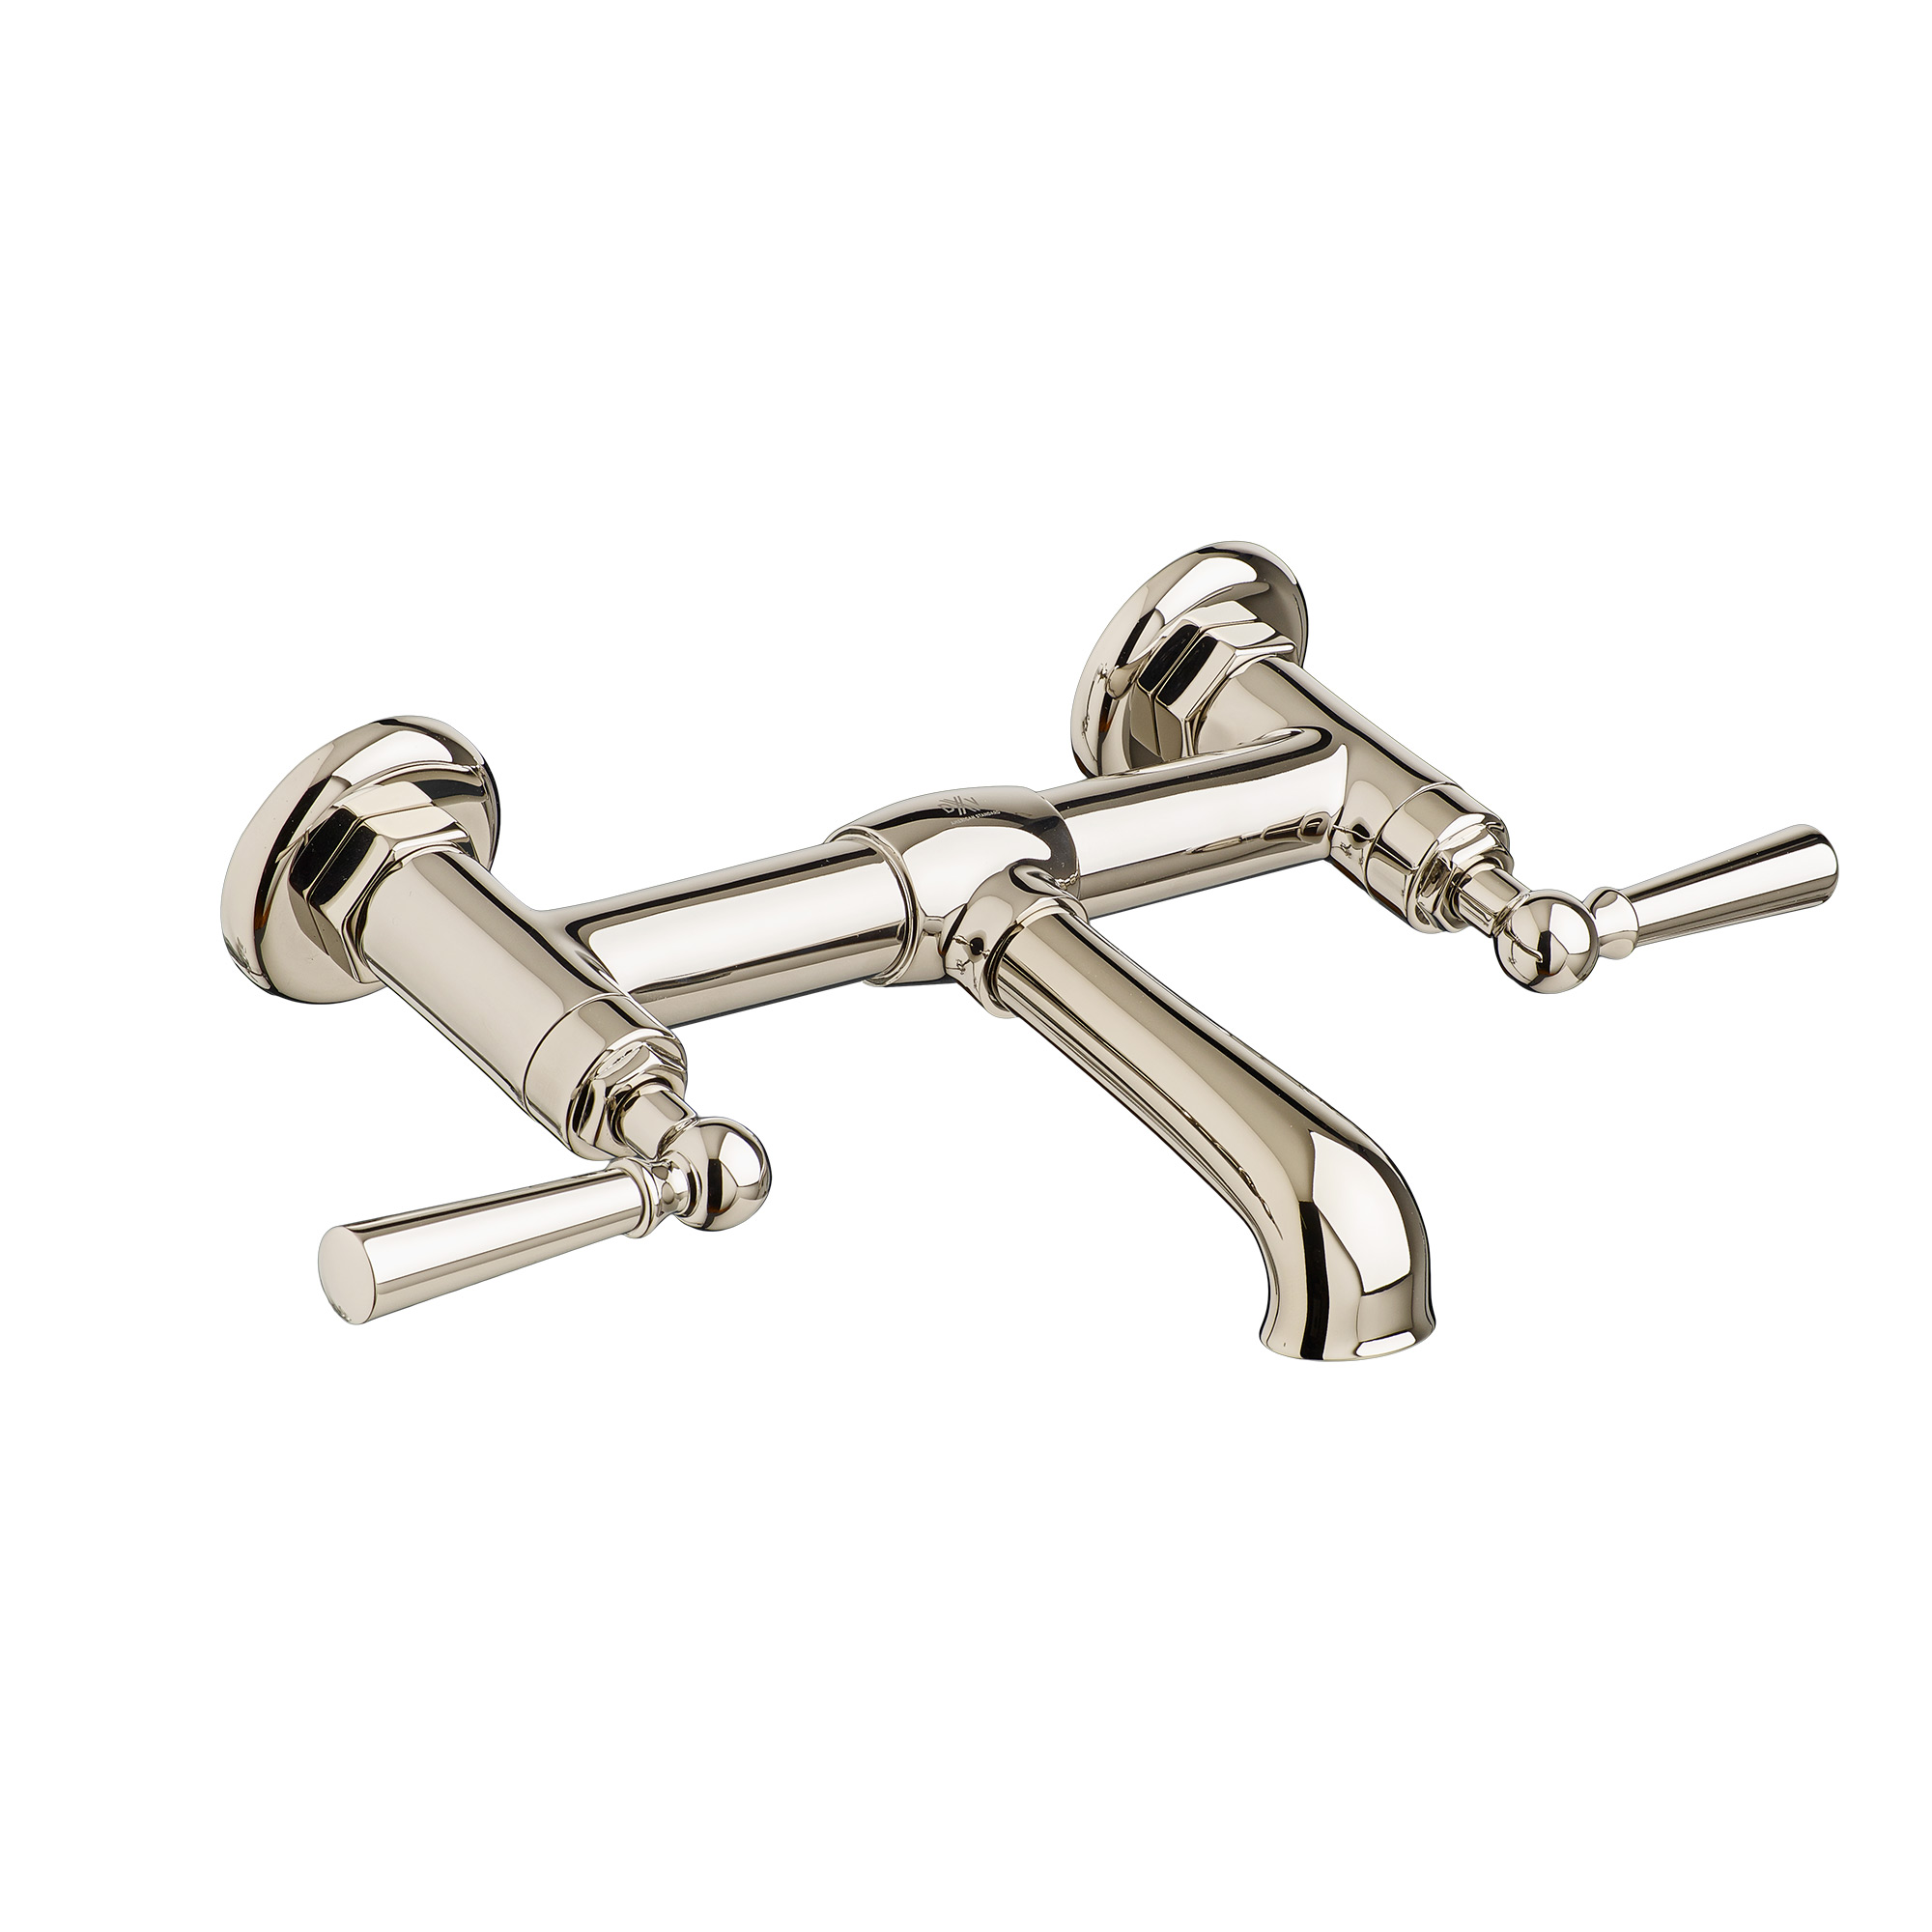 Wall Mount Bathroom Faucet With Lever Handles